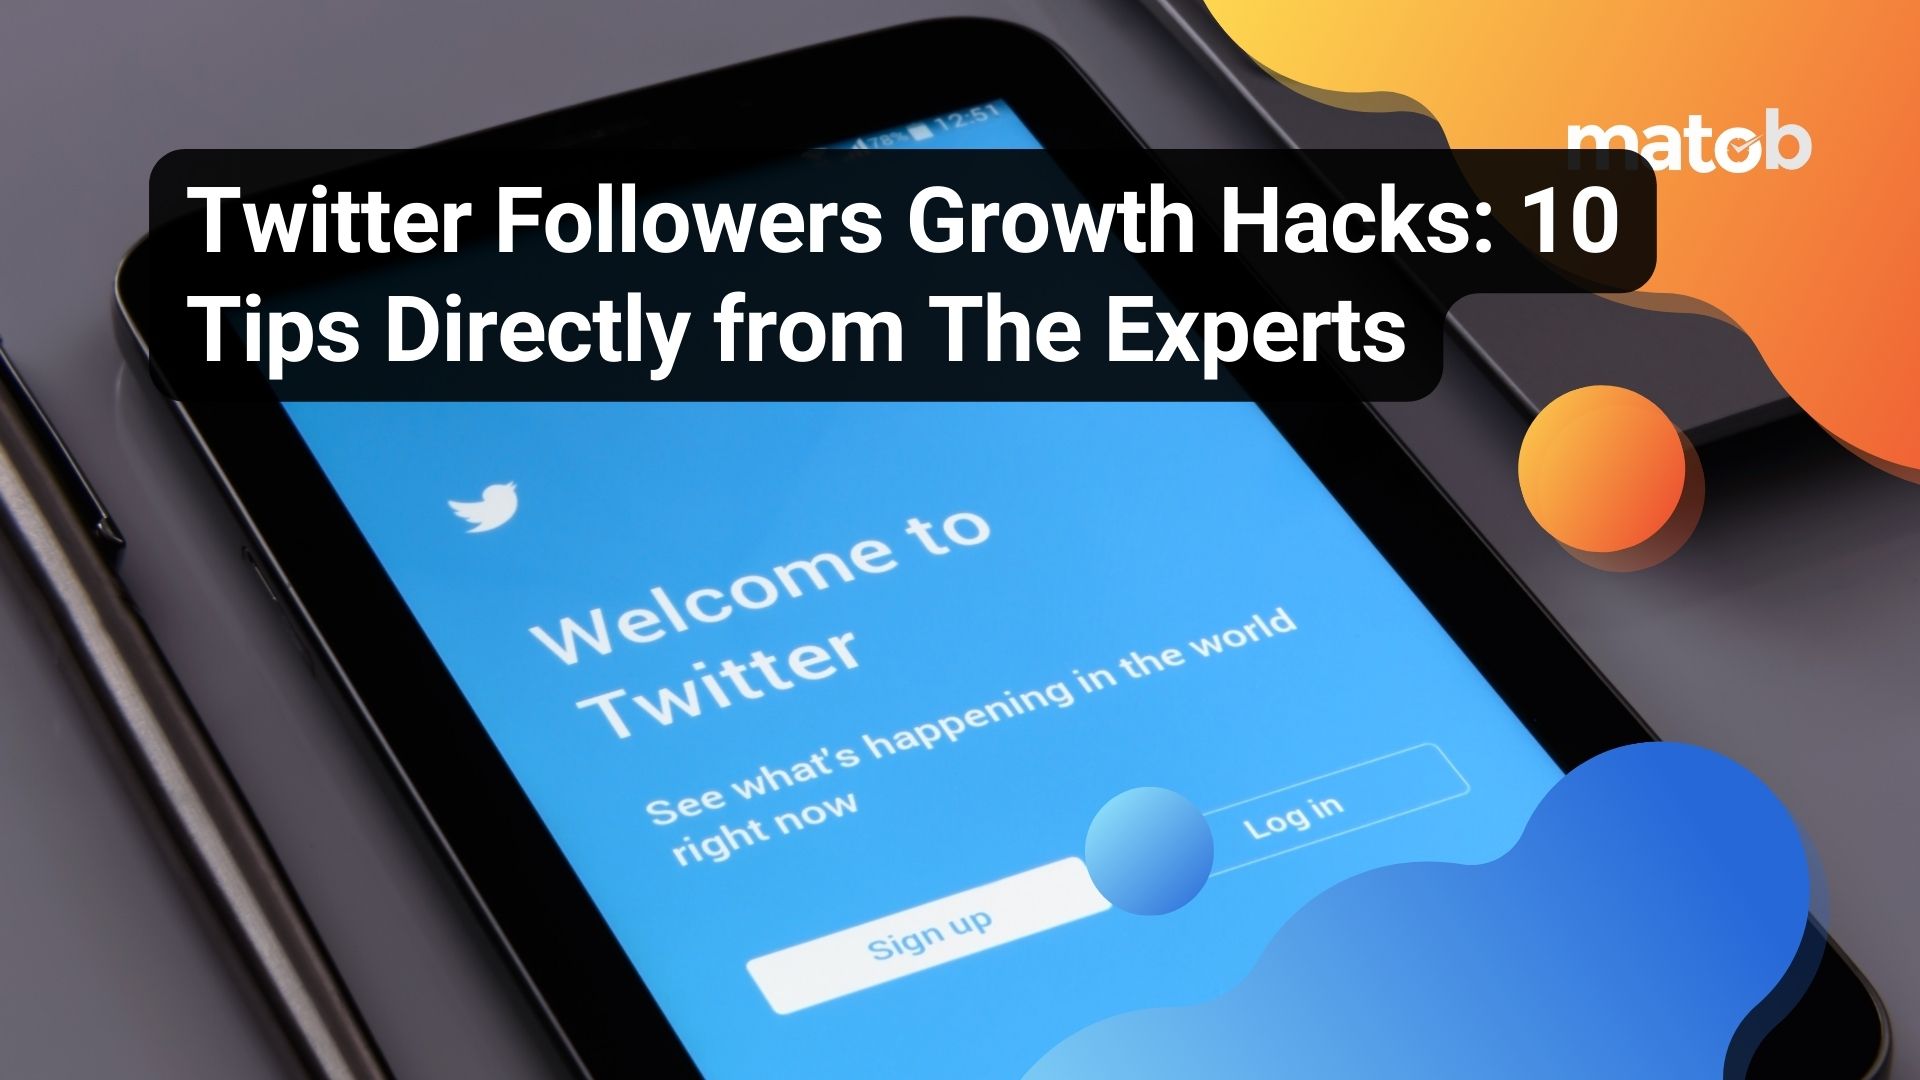 Twitter Followers Growth Hacks: 10 Tips Directly from The Experts